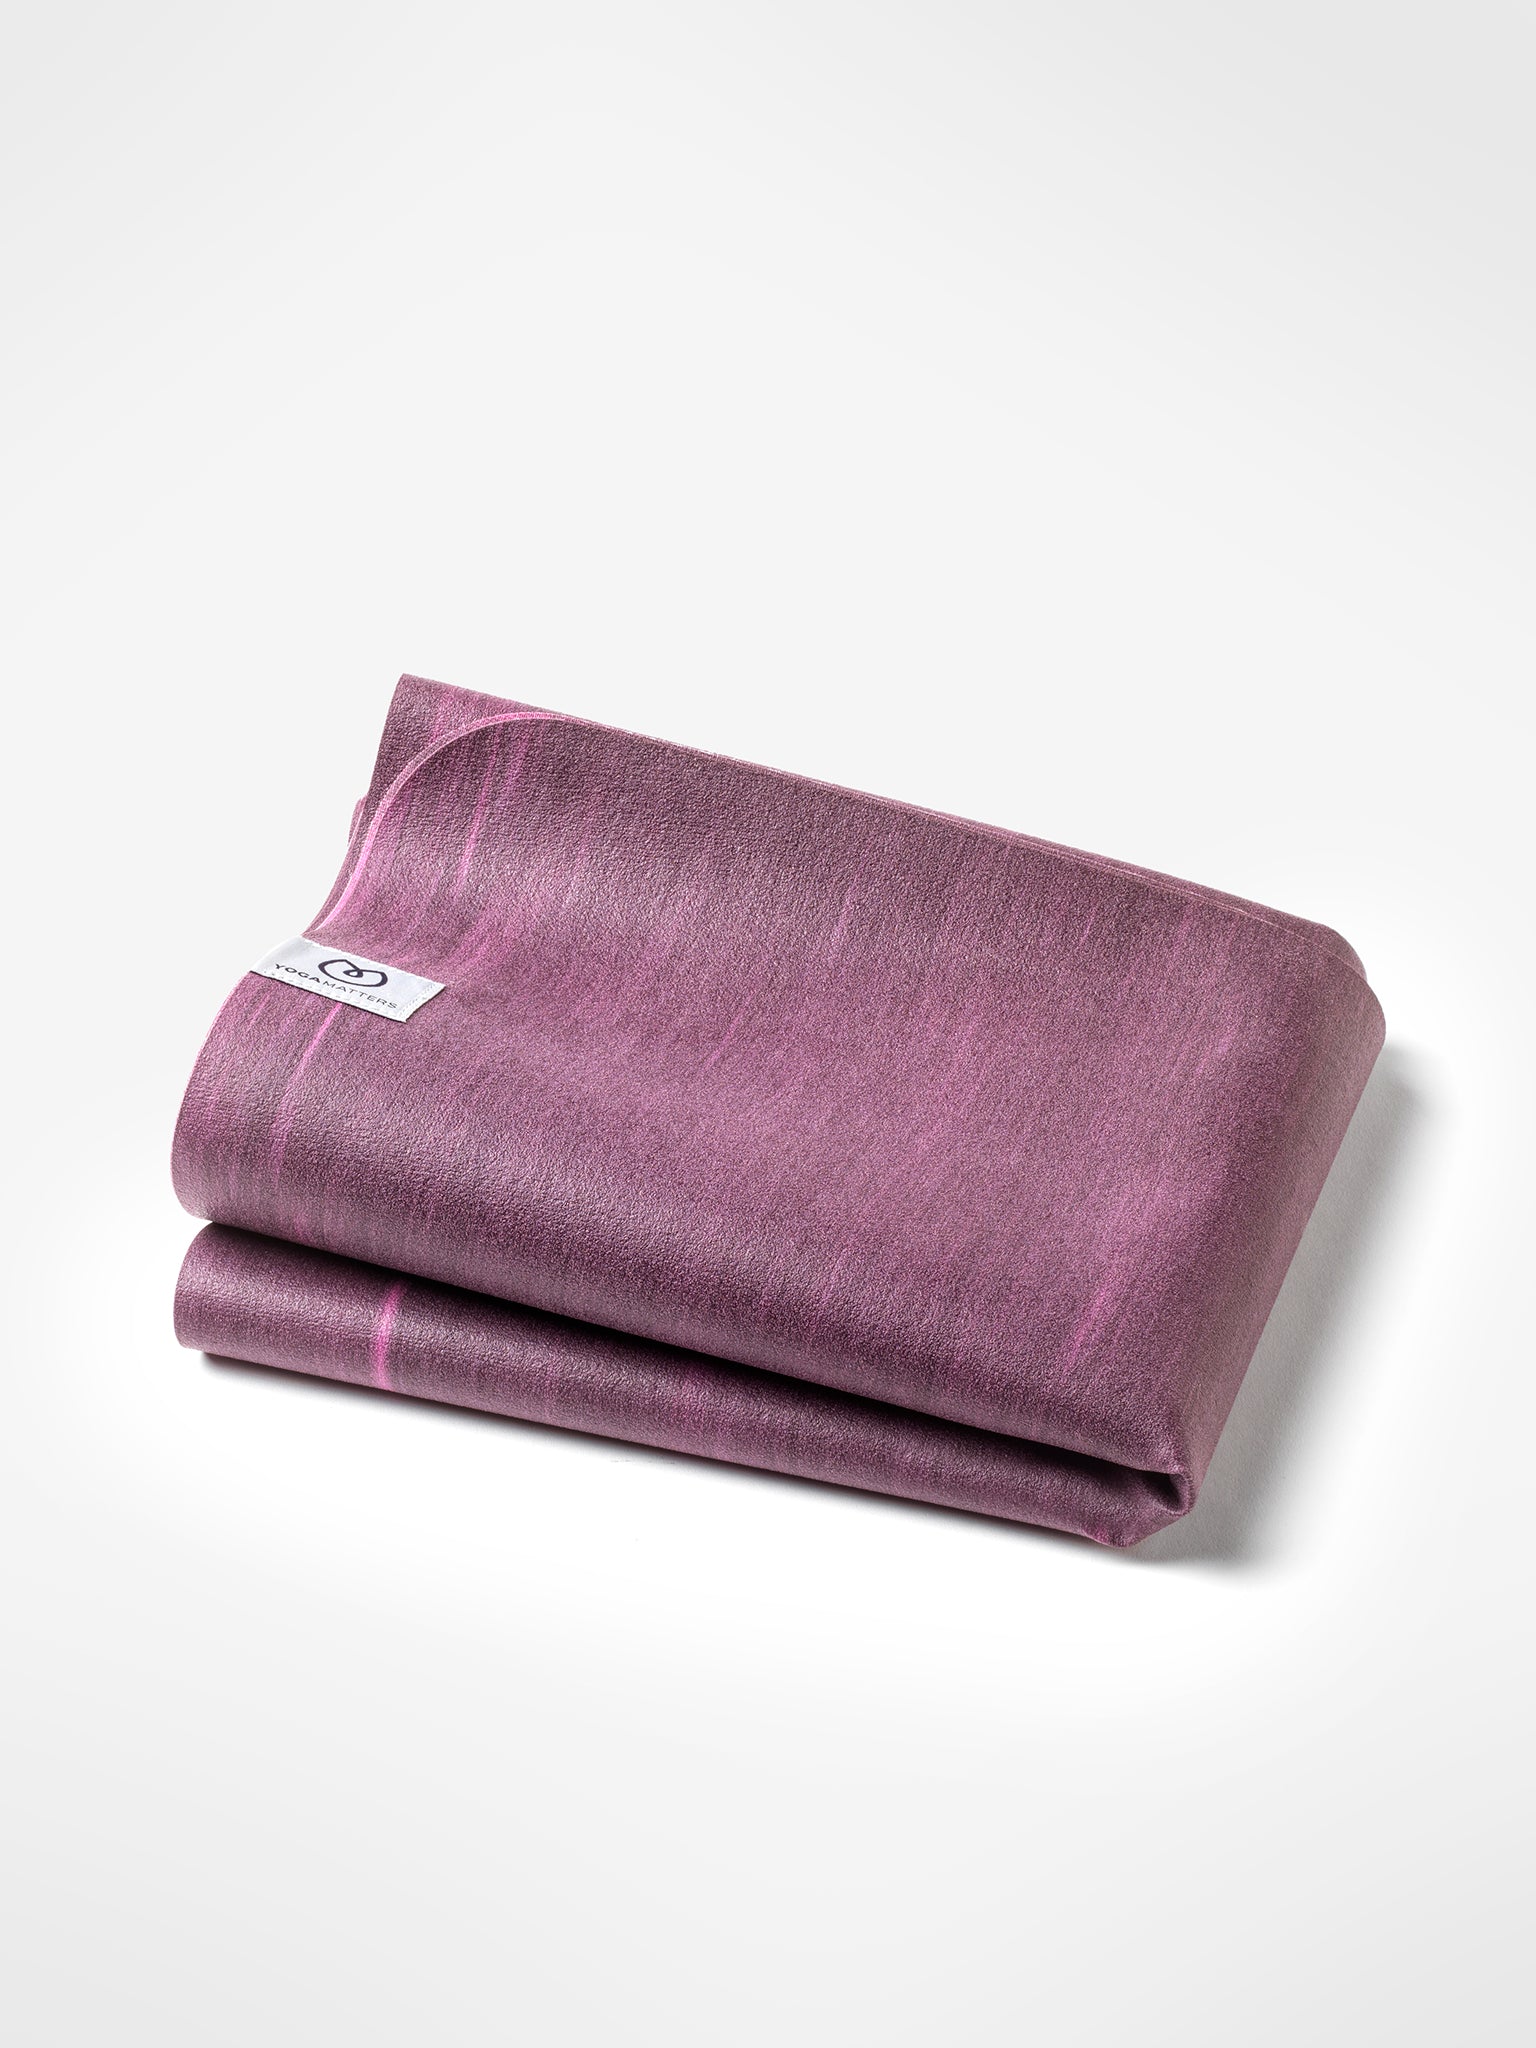 Rolled purple yoga mat with textured surface, visible brand logo on tag, photographed from side on white background